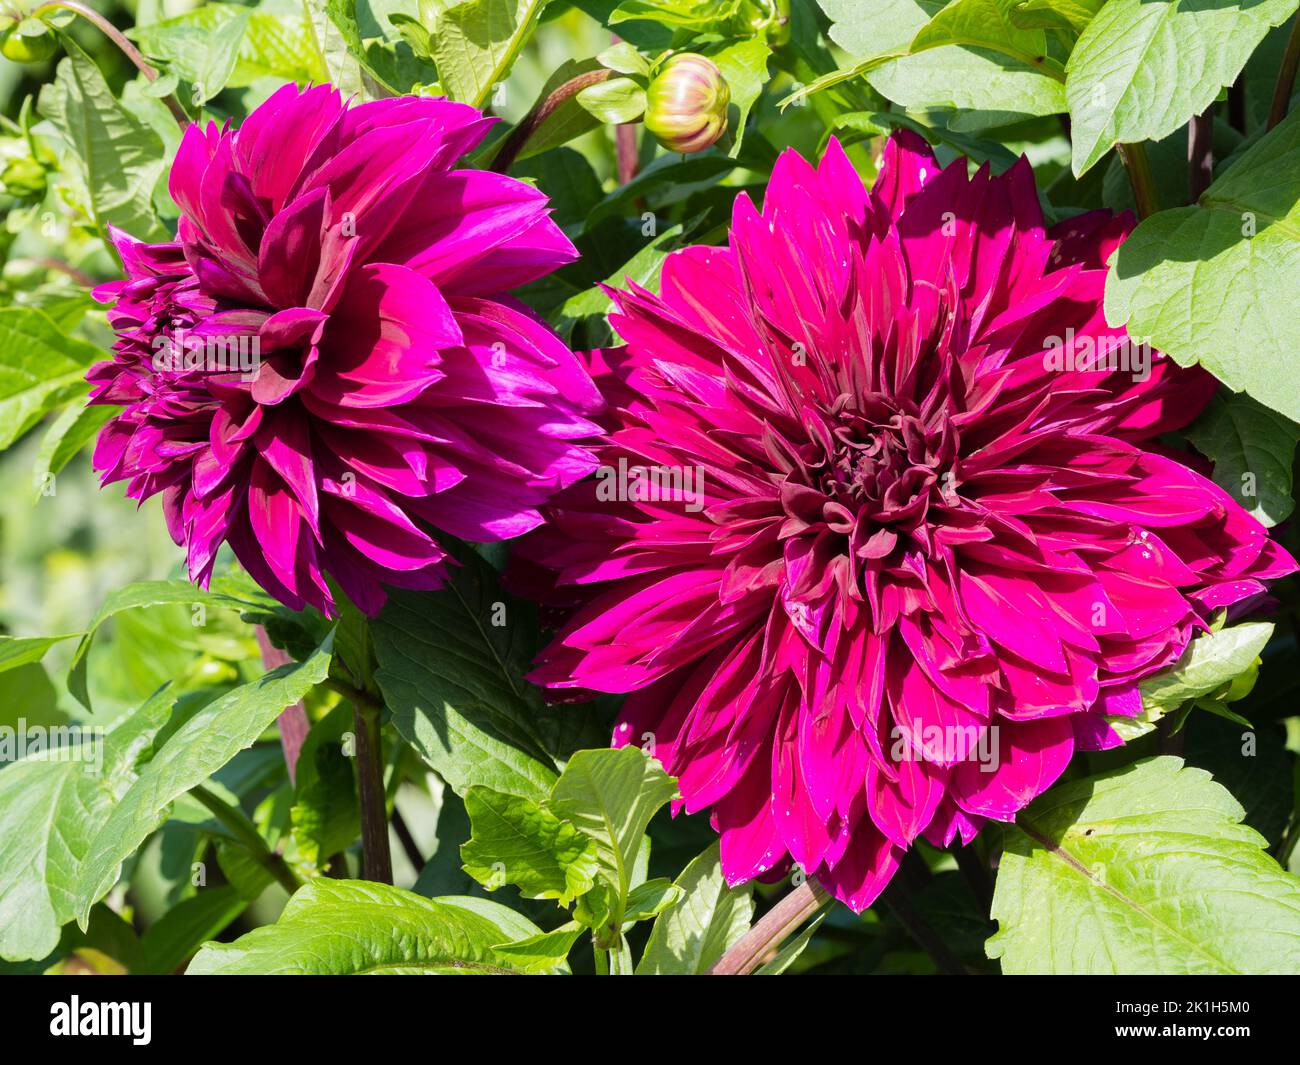 Dark pink fully double flowers of the half hardy summer border perennial, Dahlia 'Rocco' Stock Photo